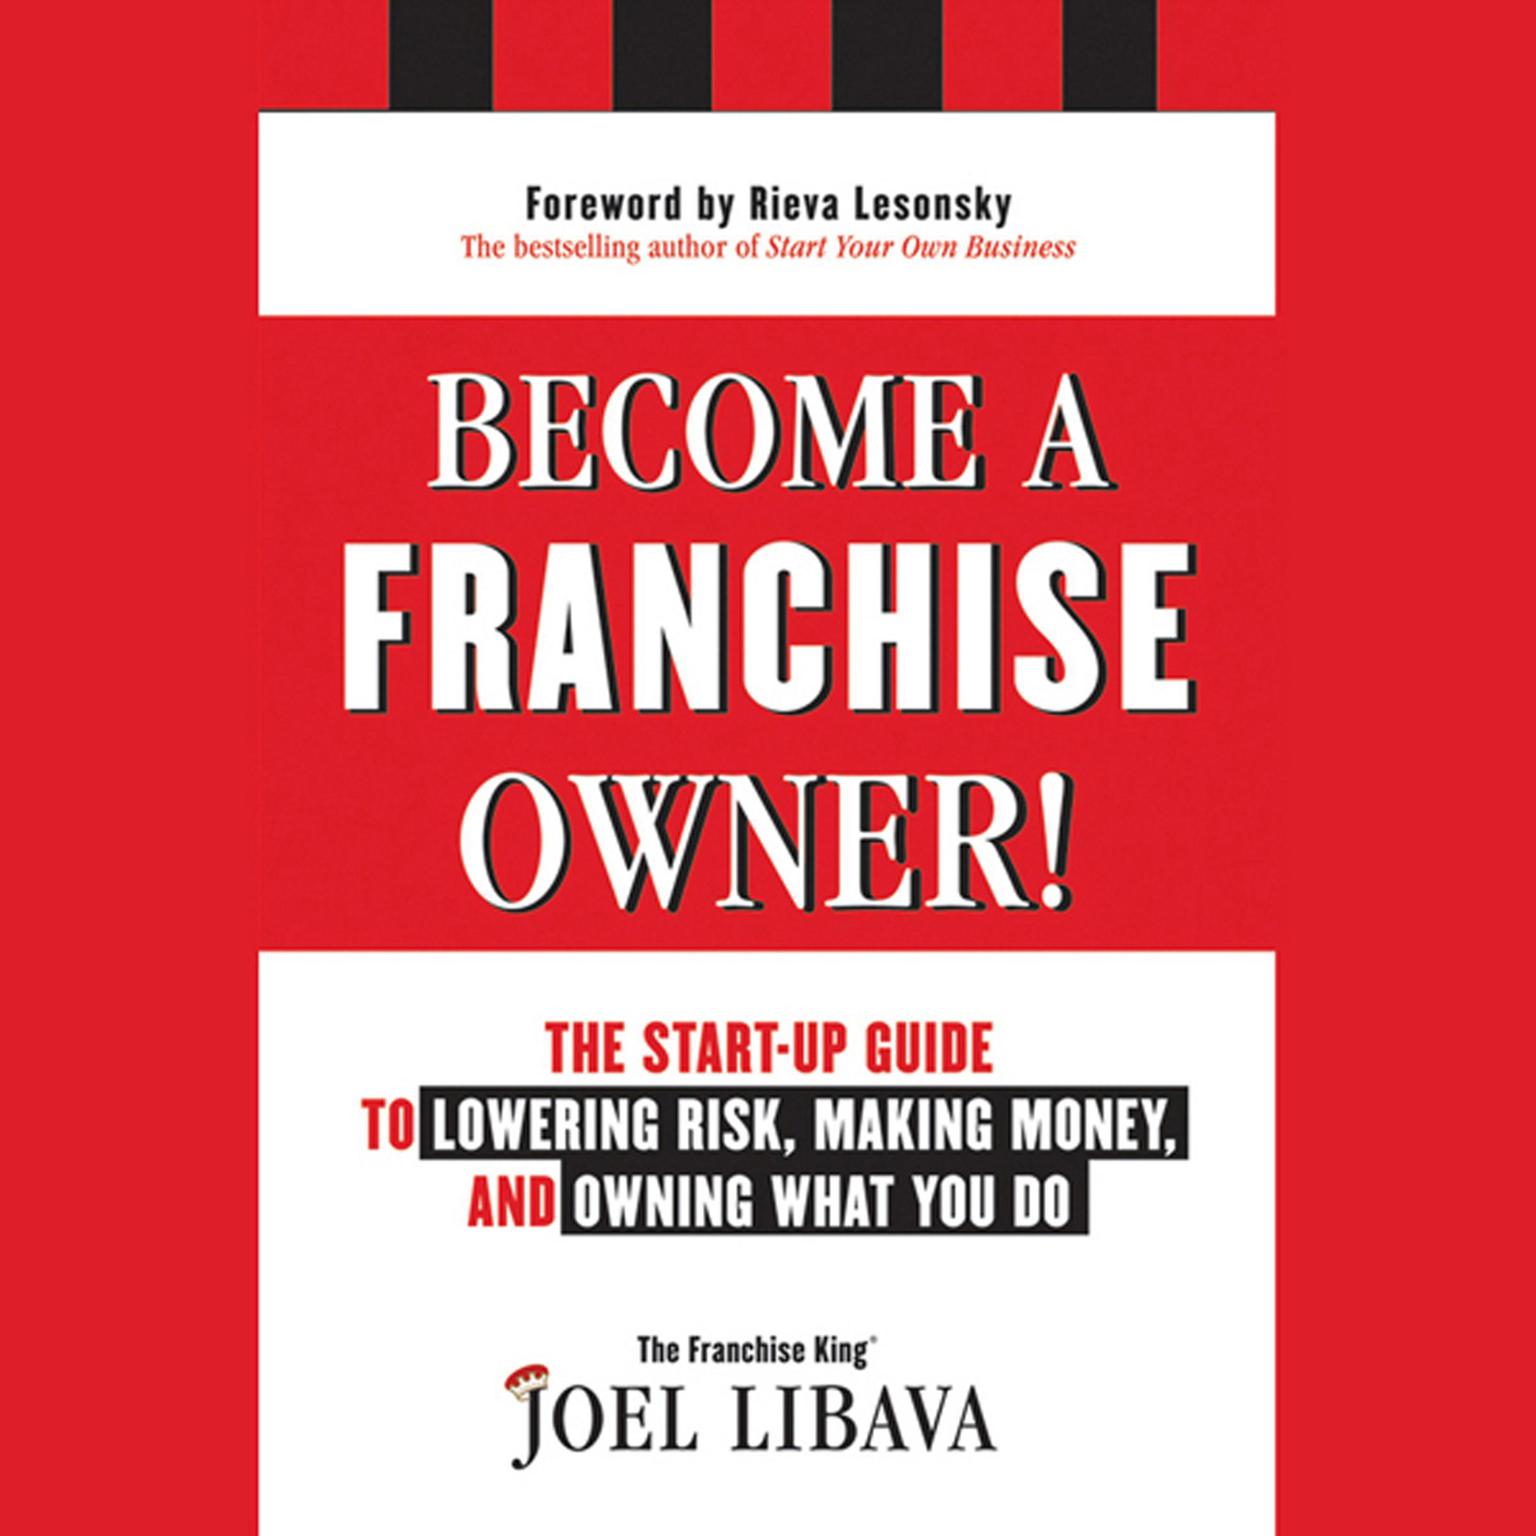 Become a Franchise Owner!: The Start-Up Guide to Lowering Risk, Making Money, and Owning What you Do Audiobook, by Joel Libava